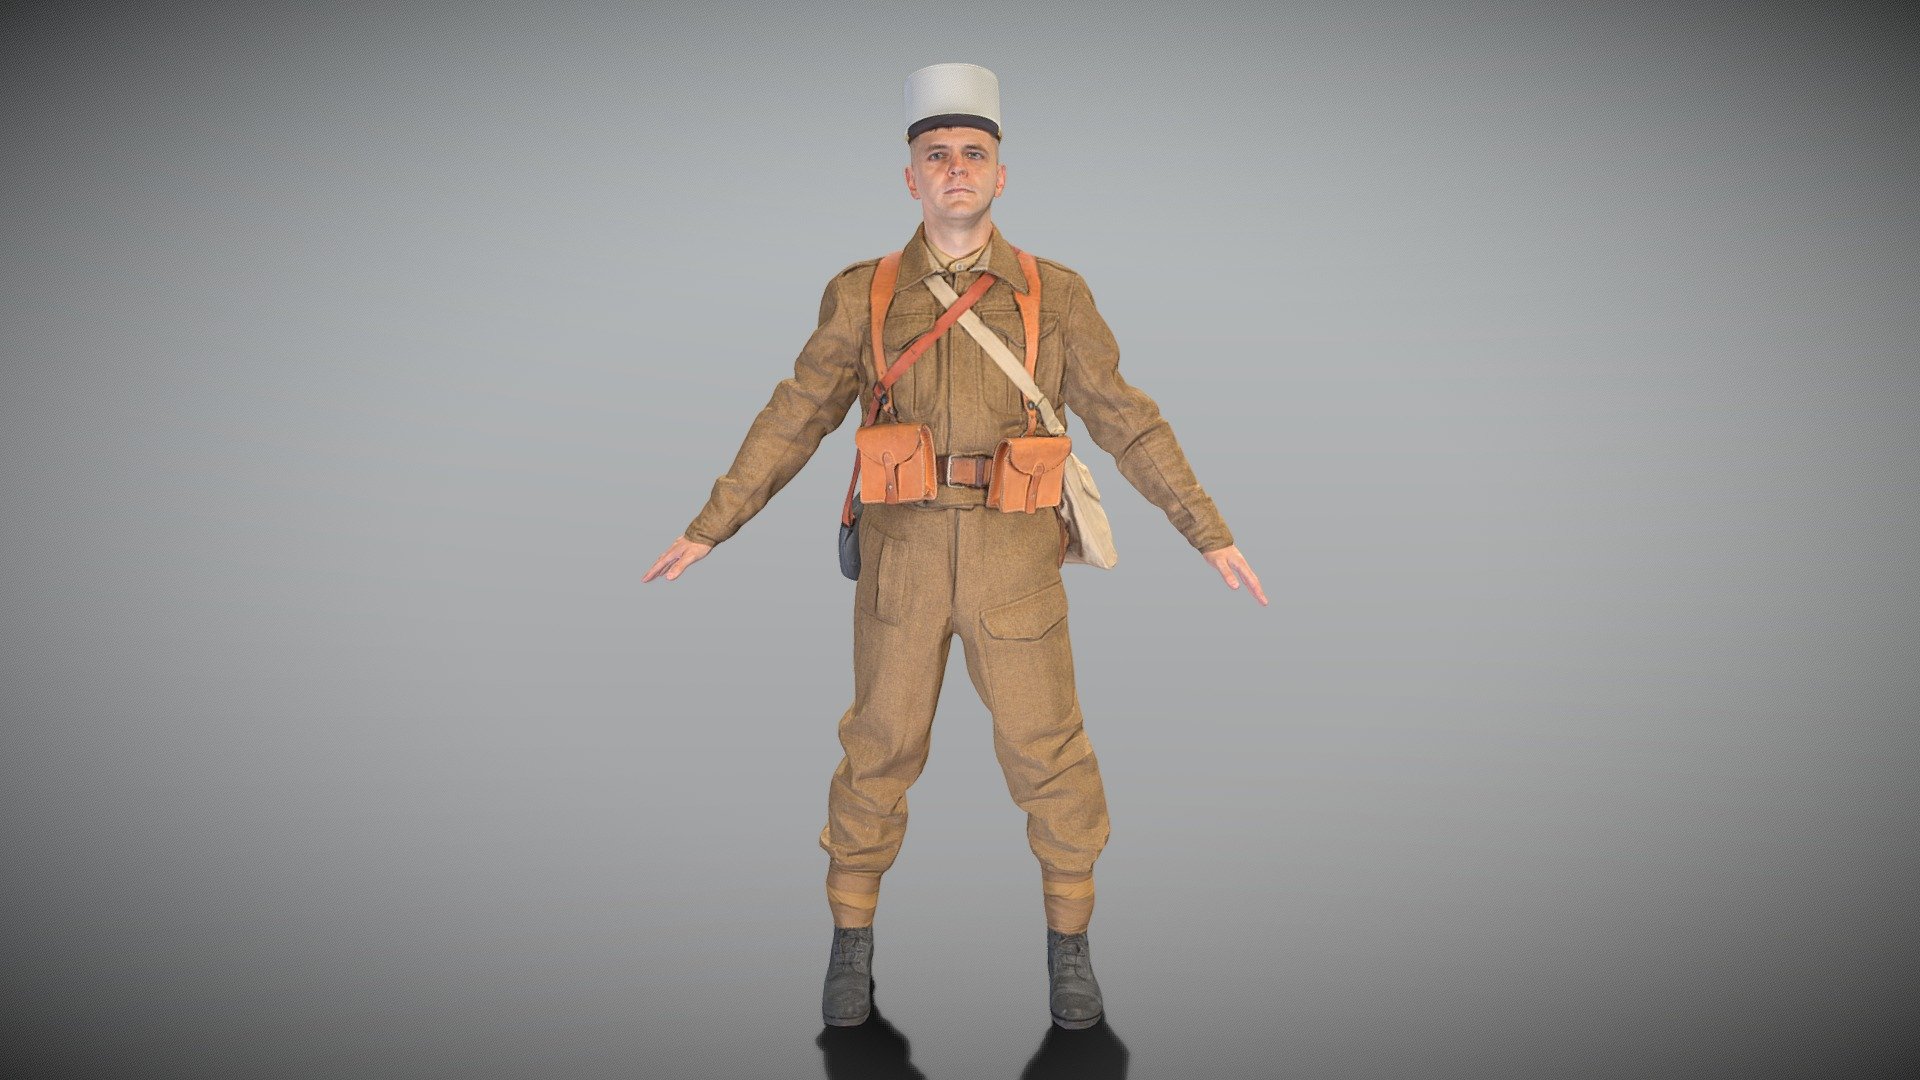 This is a true human size and detailed model of a French infantry character from 1940s. All props and suit are original. The model is captured in the A-pose with mesh ready for rigging and animation in all most usable 3d software.

Technical specifications:




digital double scan model

low-poly model

high-poly model (.ztl tool with 5-6 subdivisions) clean and retopologized automatically via ZRemesher

fully quad topology

sufficiently clean

edge Loops based

ready for subdivision

8K texture color map

non-overlapping UV map

ready for animation

PBR textures 8K resolution: Normal, Displacement, Albedo maps

Download package includes a Cinema 4D project file with Redshift shader, OBJ, FBX, STL files, which are applicable for 3ds Max, Maya, Unreal Engine, Unity, Blender, etc. All the textures you will find in the “Tex” folder, included into the main archive.

3D EVERYTHING

Stand with Ukraine! - French infantry soldier in A-pose 403 - Buy Royalty Free 3D model by deep3dstudio 3d model